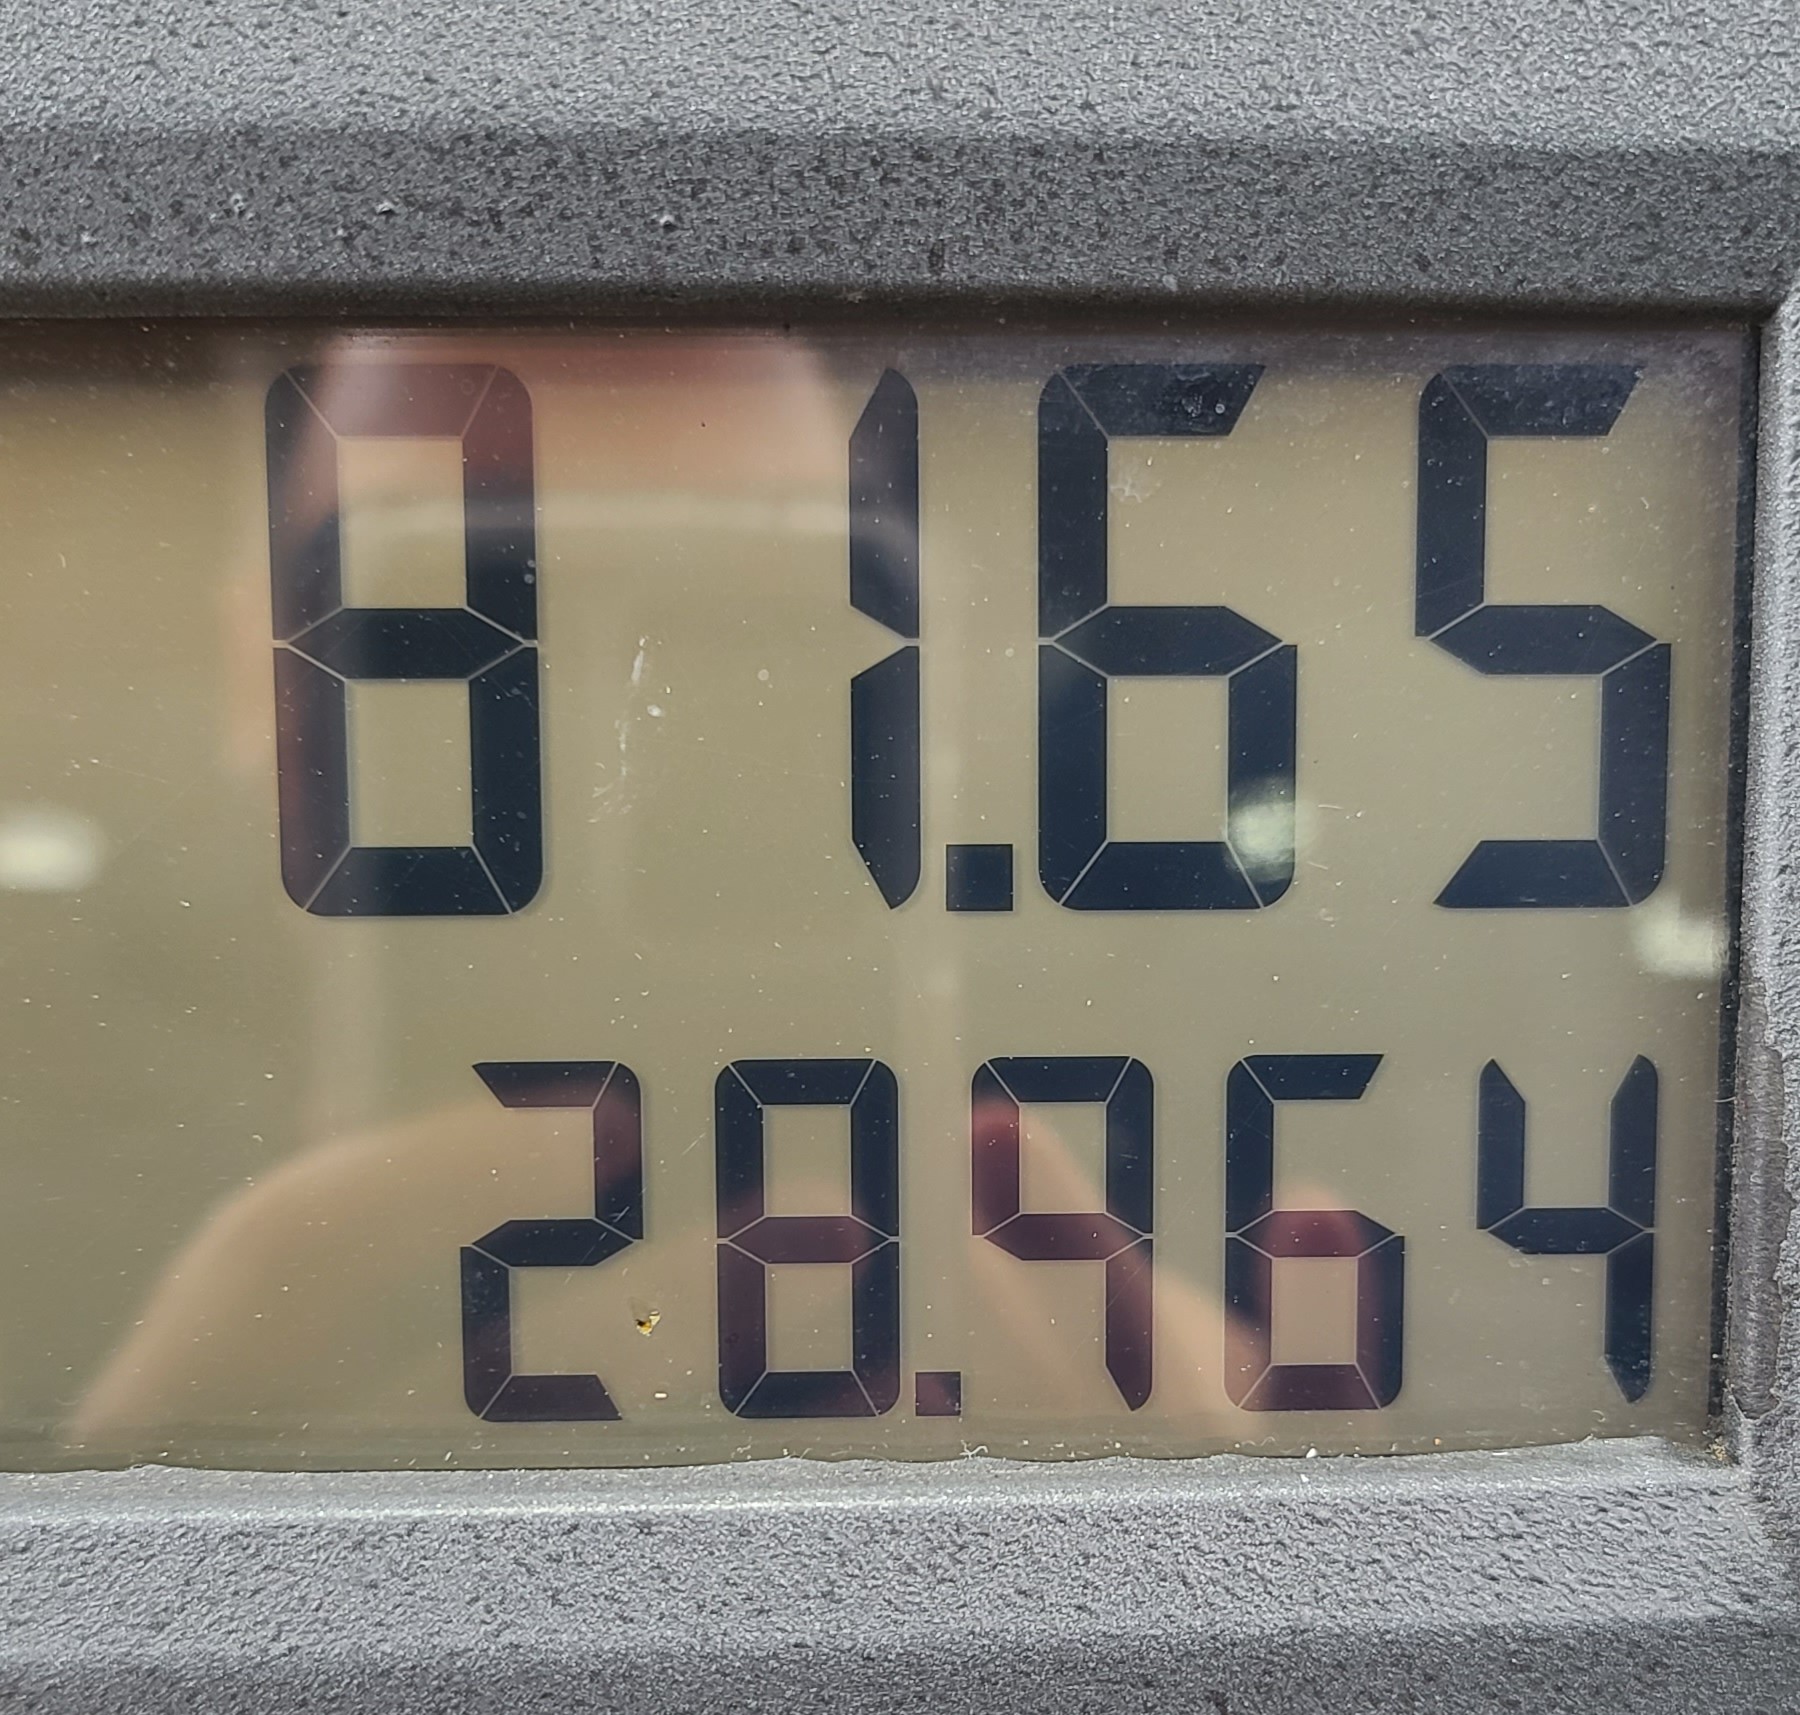 Almost 30.00 more in about a year Gas prices